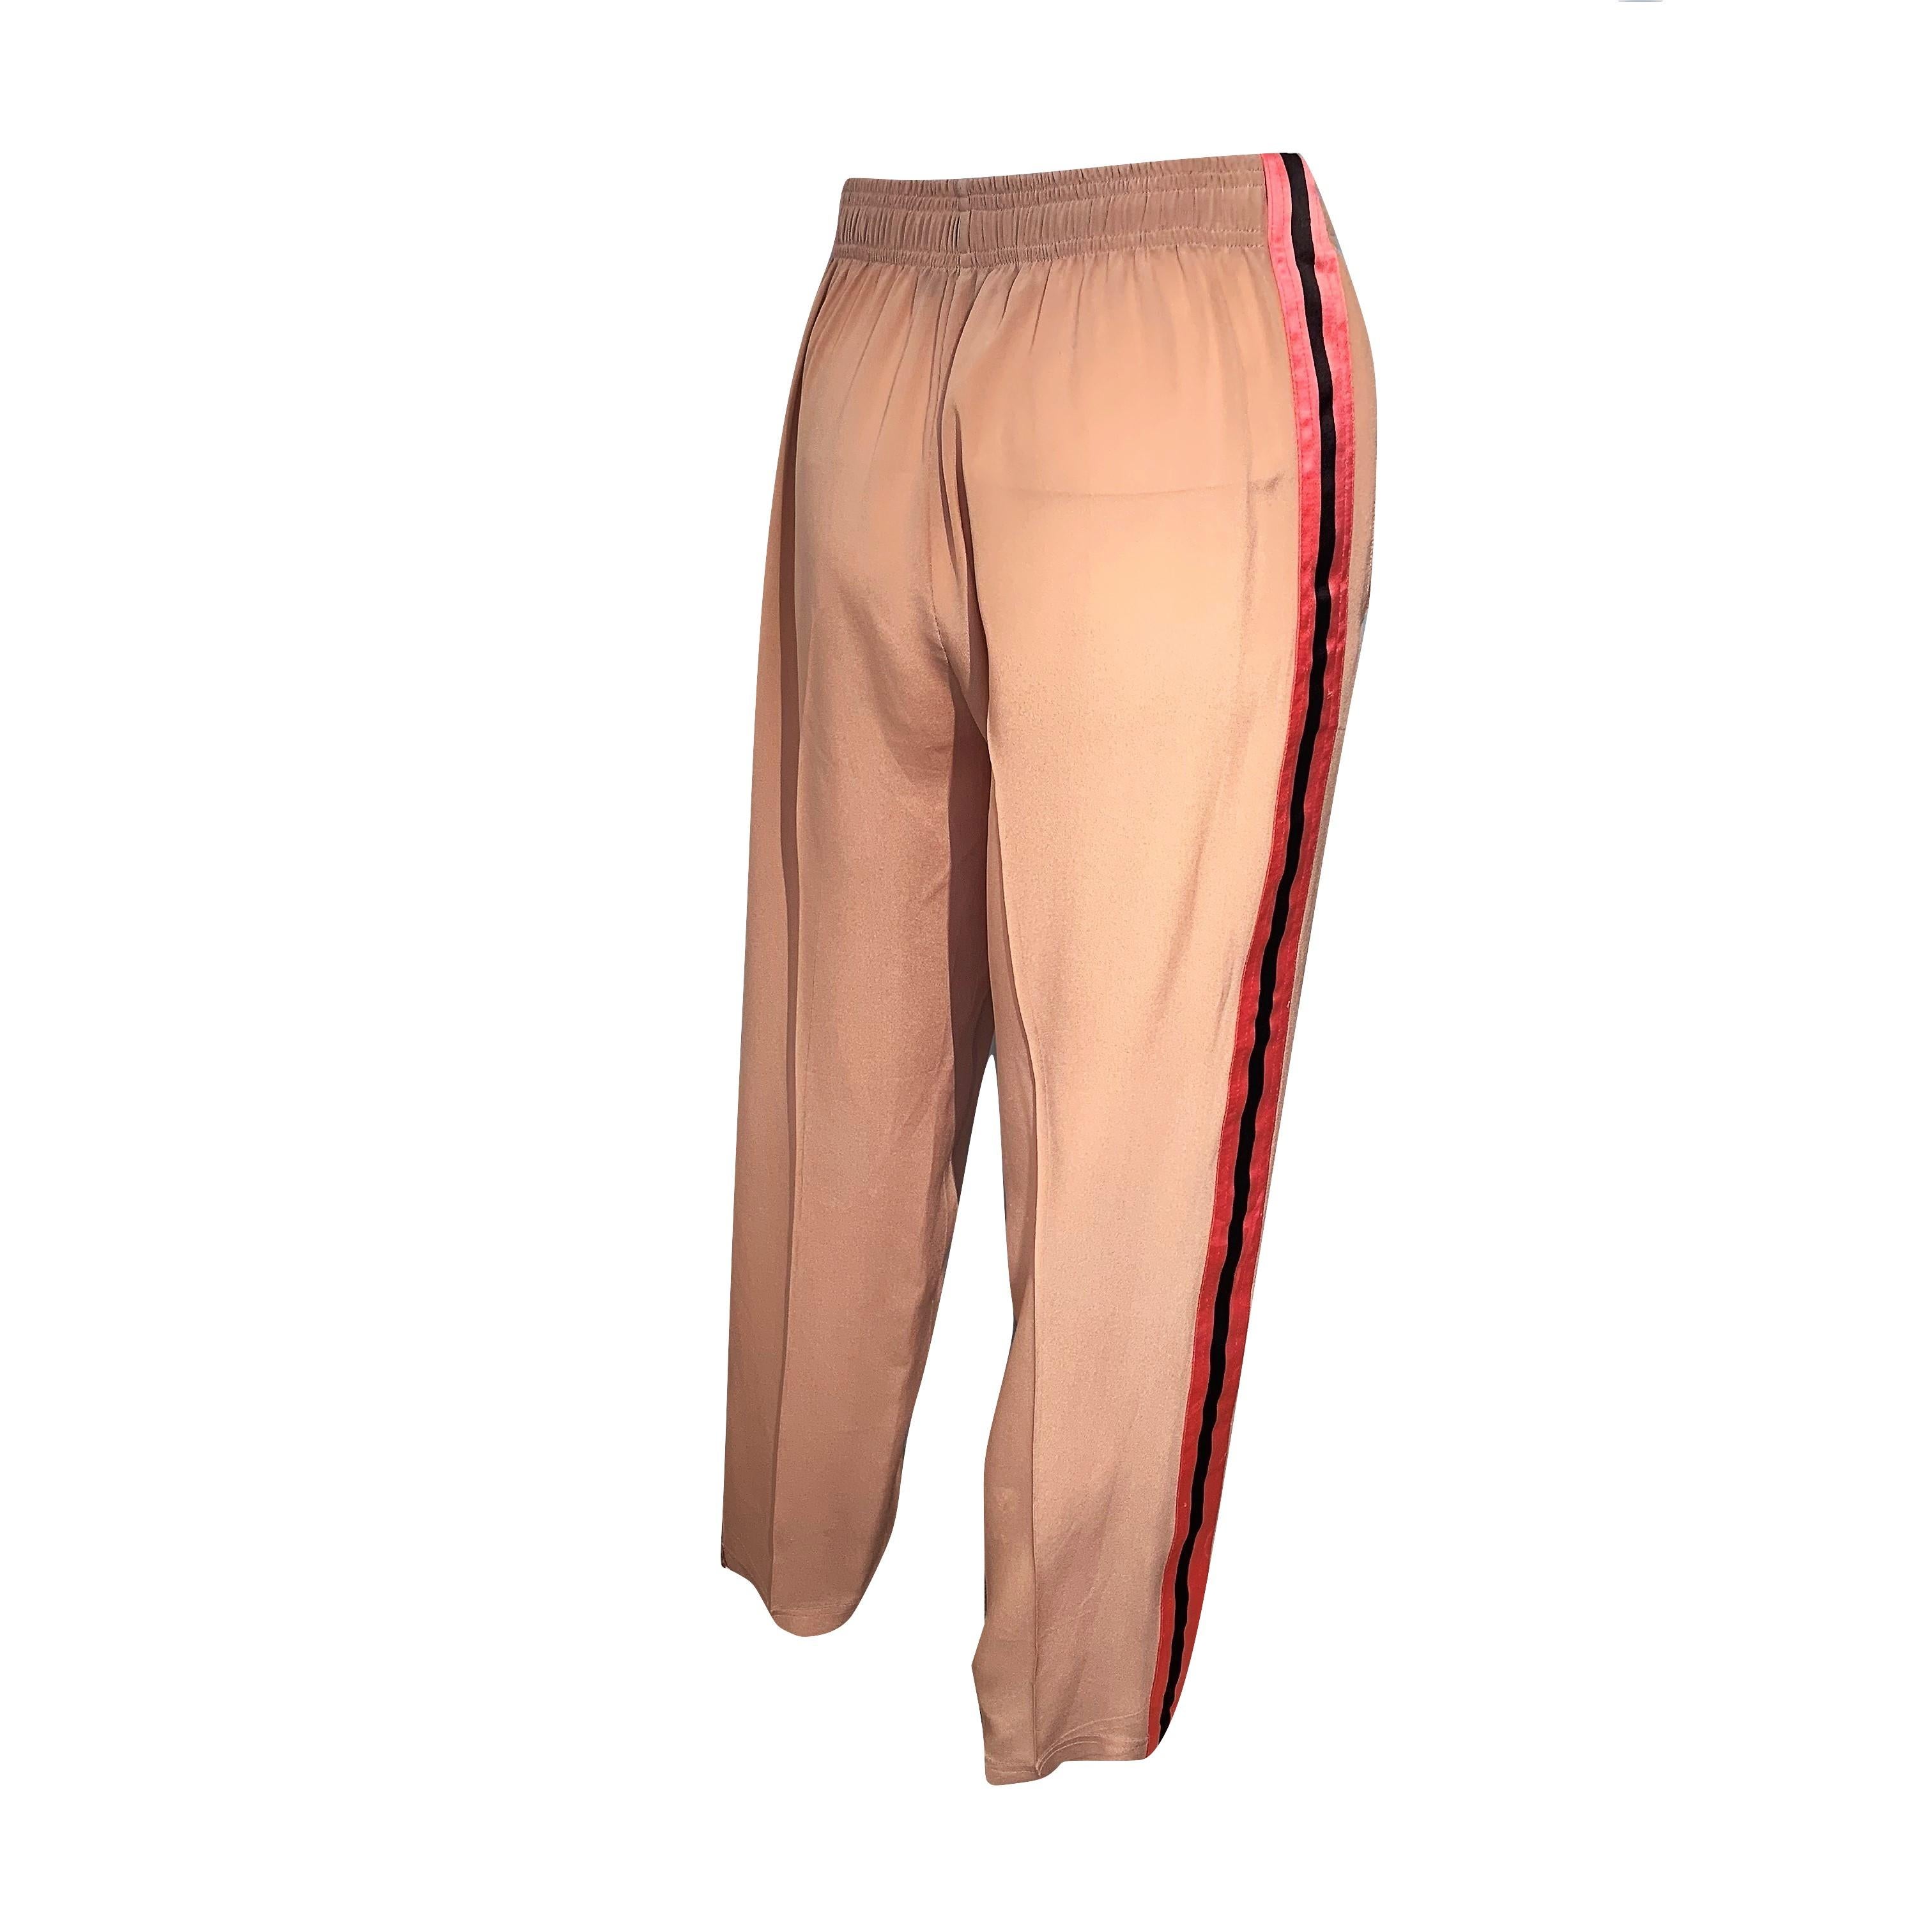 New Tom Ford For Gucci 2004 Final Collection Silk Runway Pants IT 42  (S-M)  8